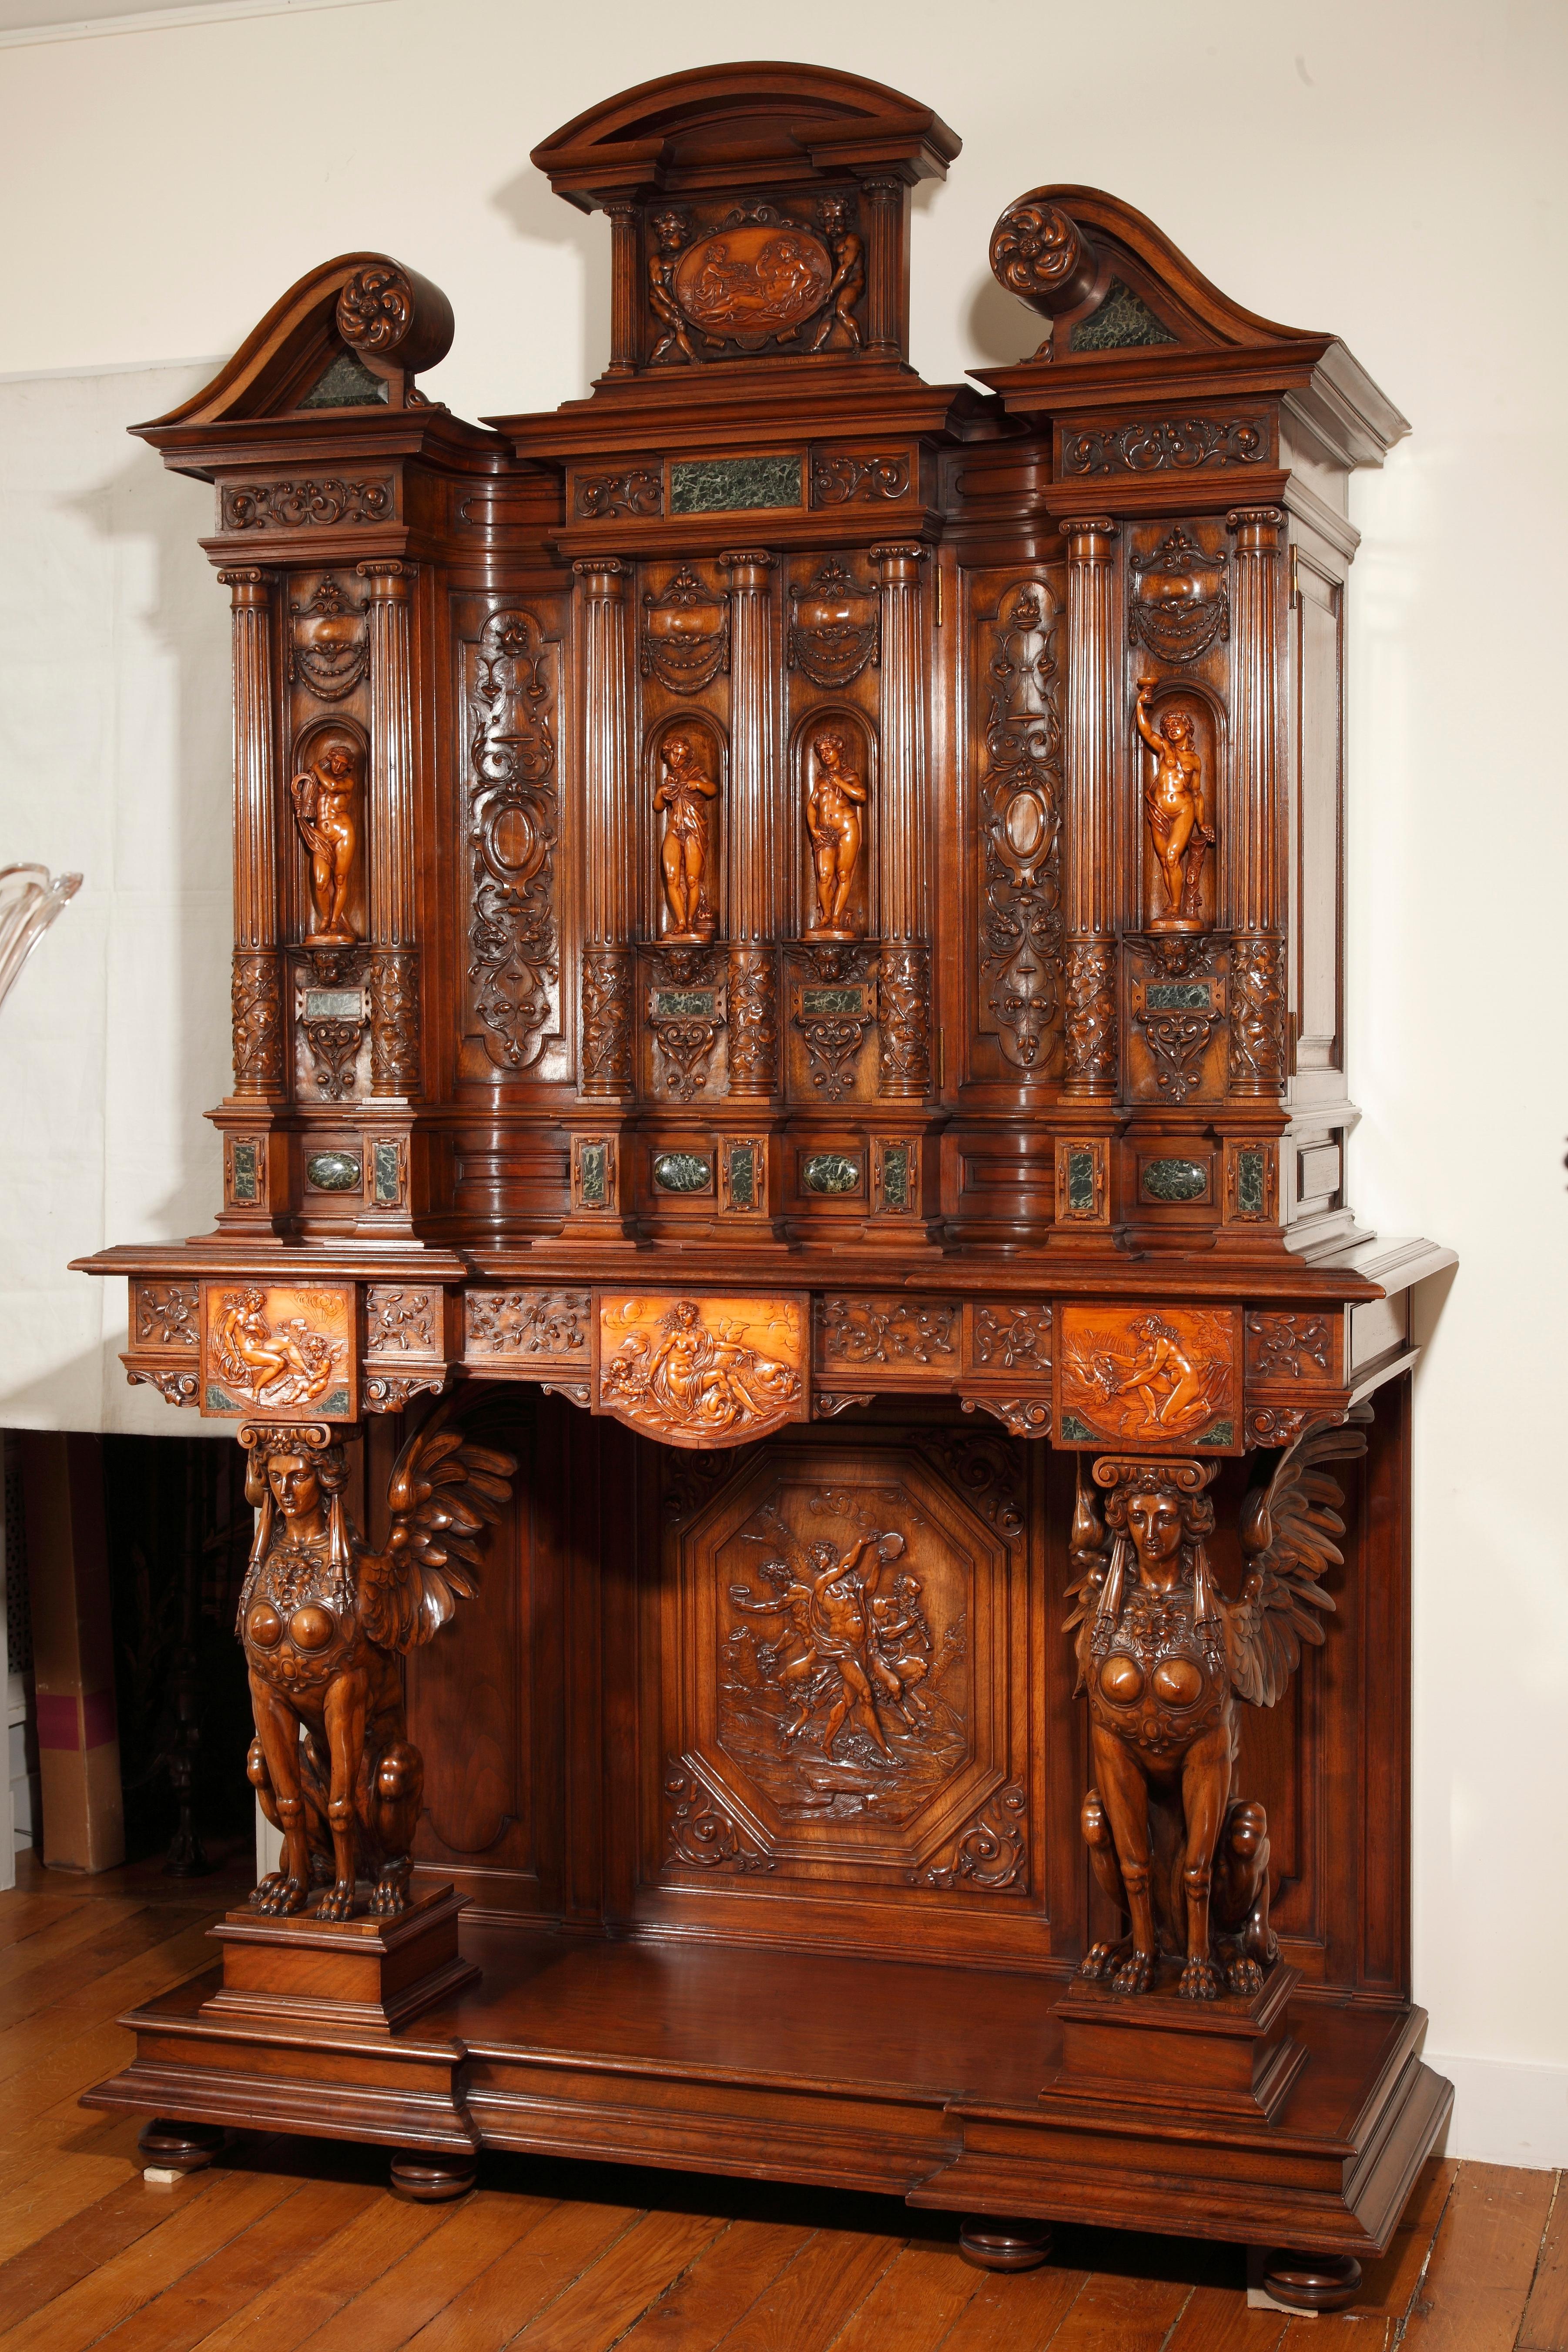 Renaissance Style "Four Seasons" Cabinet by M. Lerolle, France, Circa 1890  For Sale at 1stDibs